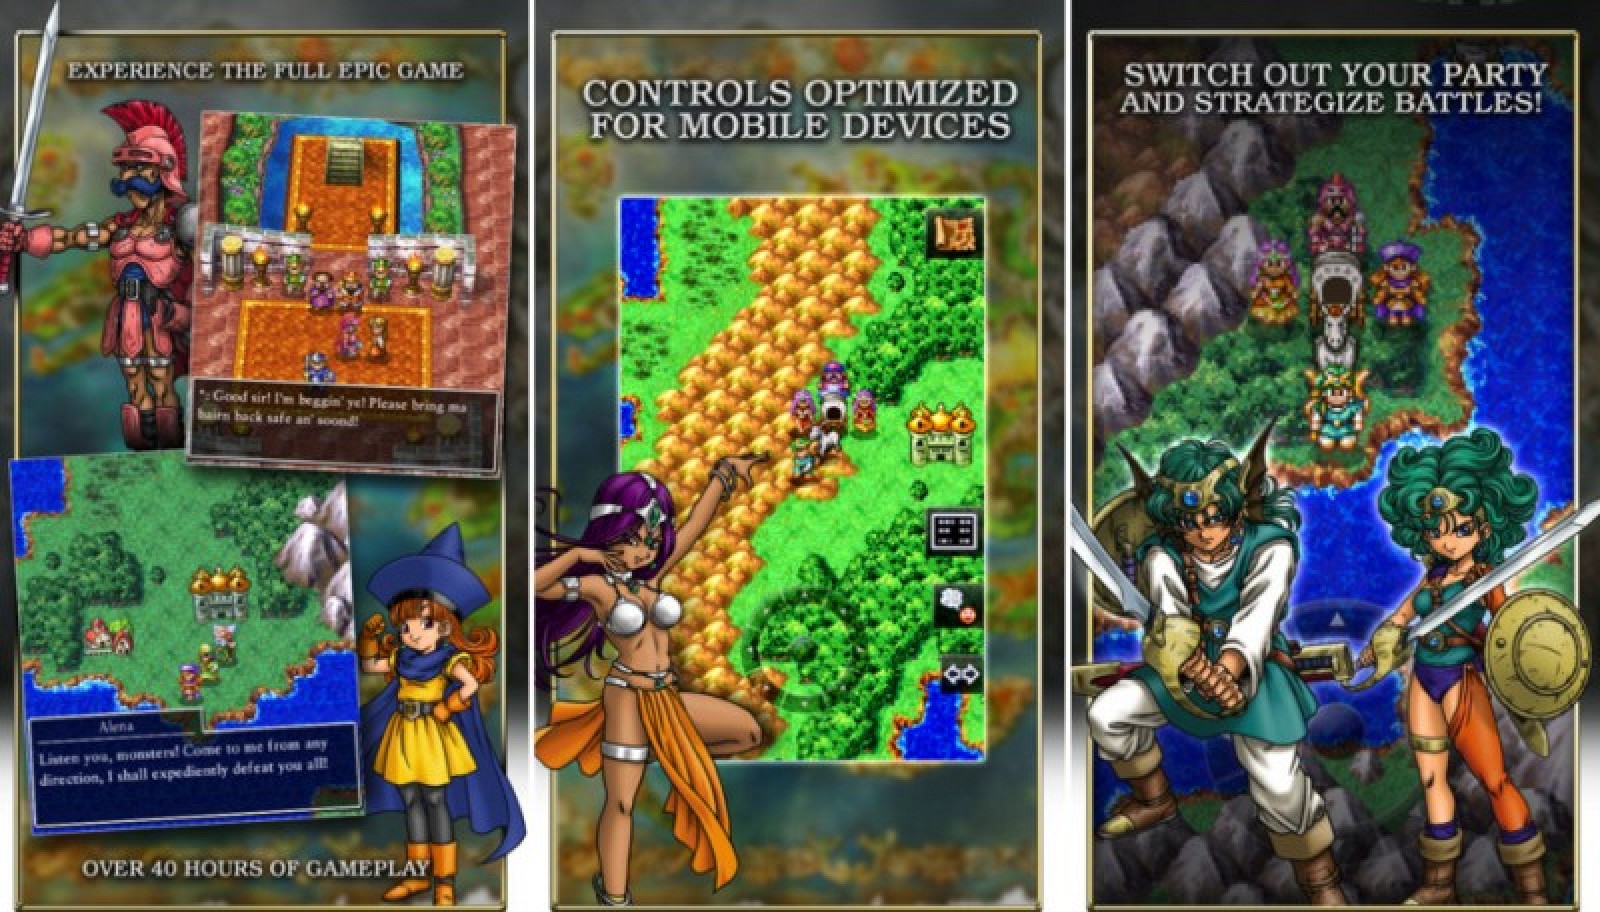 Square-Enix Releases Turn-Based RPG 'Dragon Quest IV' for iOS - MacRumors